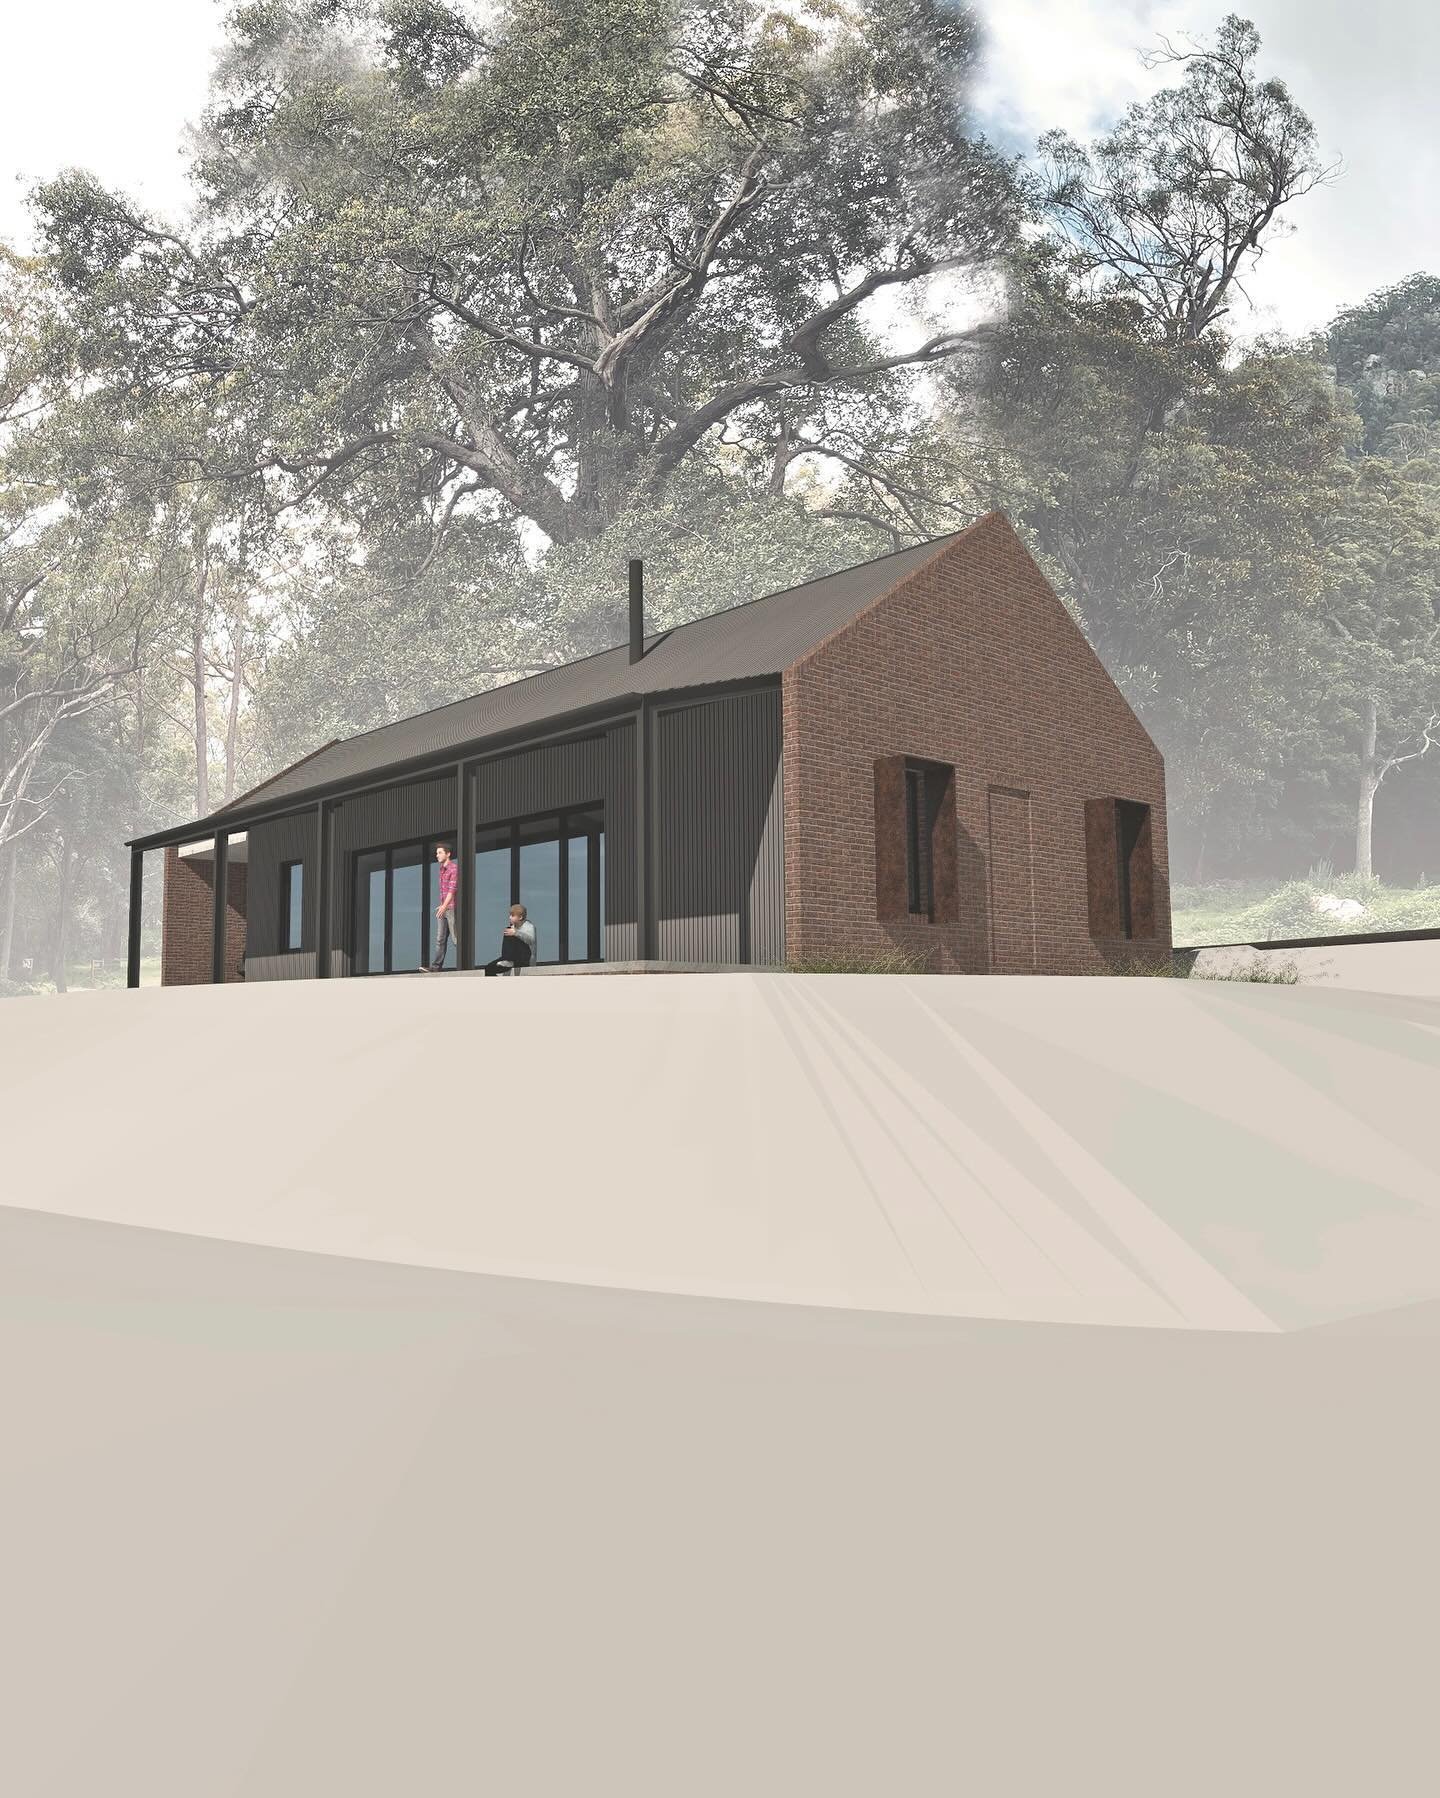 QUARTER COTTAGE:
An unbuilt Farmstay Accomodation proposal inspired by the coal mining history of the location. The brick parapet bookends reflect the silhouette of an early workers cottage, typically featuring a central entry door with two windows e